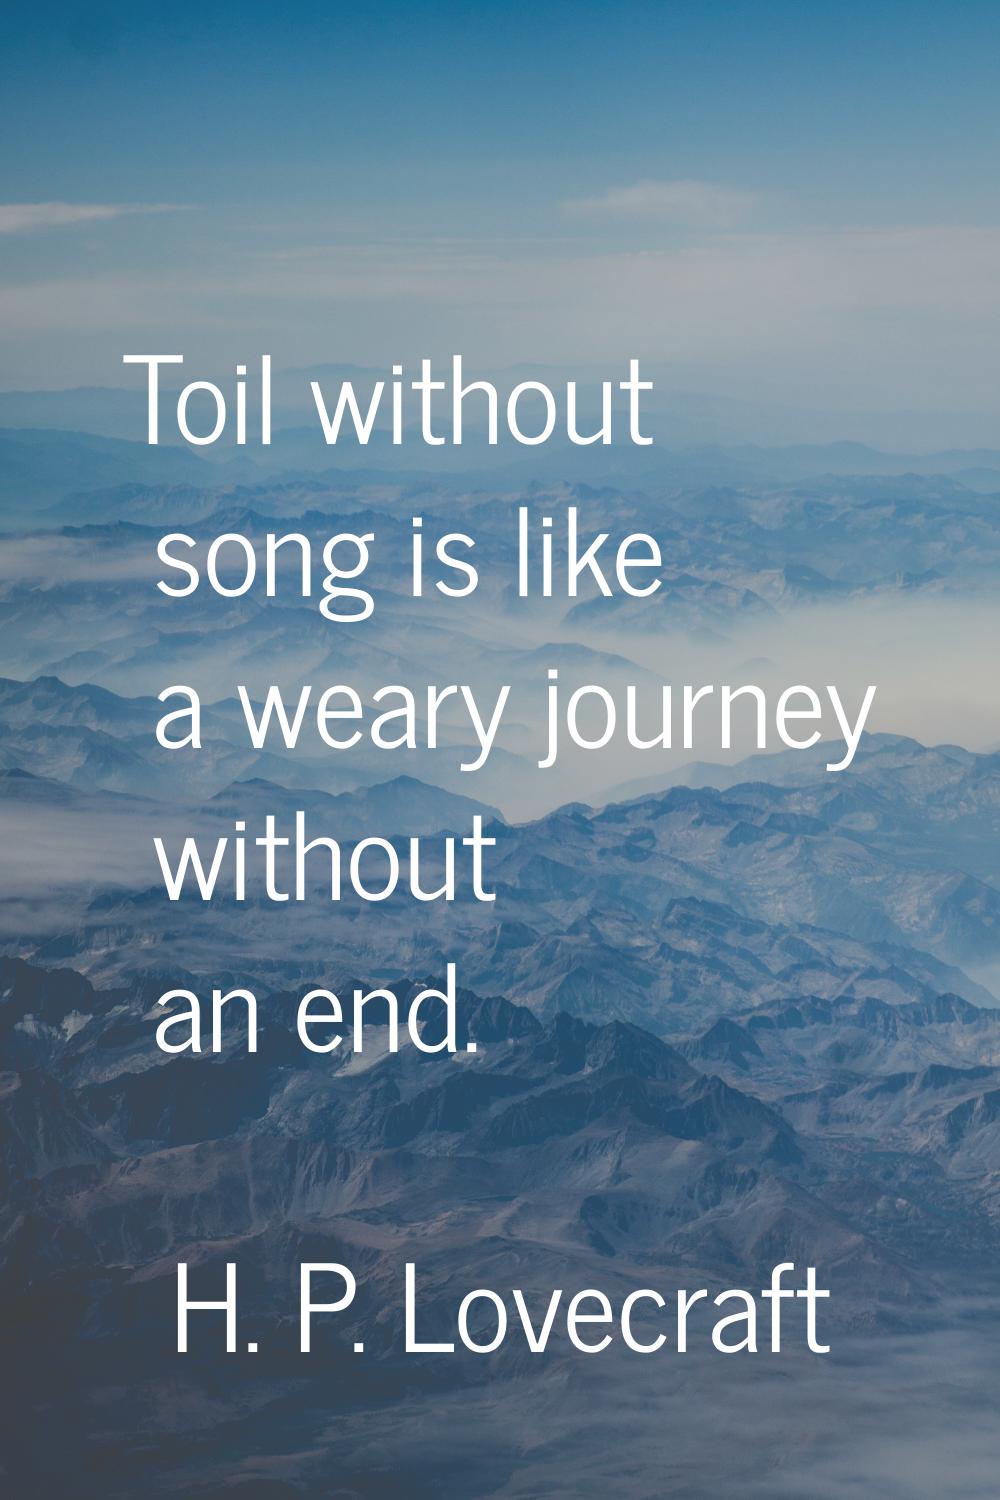 Toil without song is like a weary journey without an end.